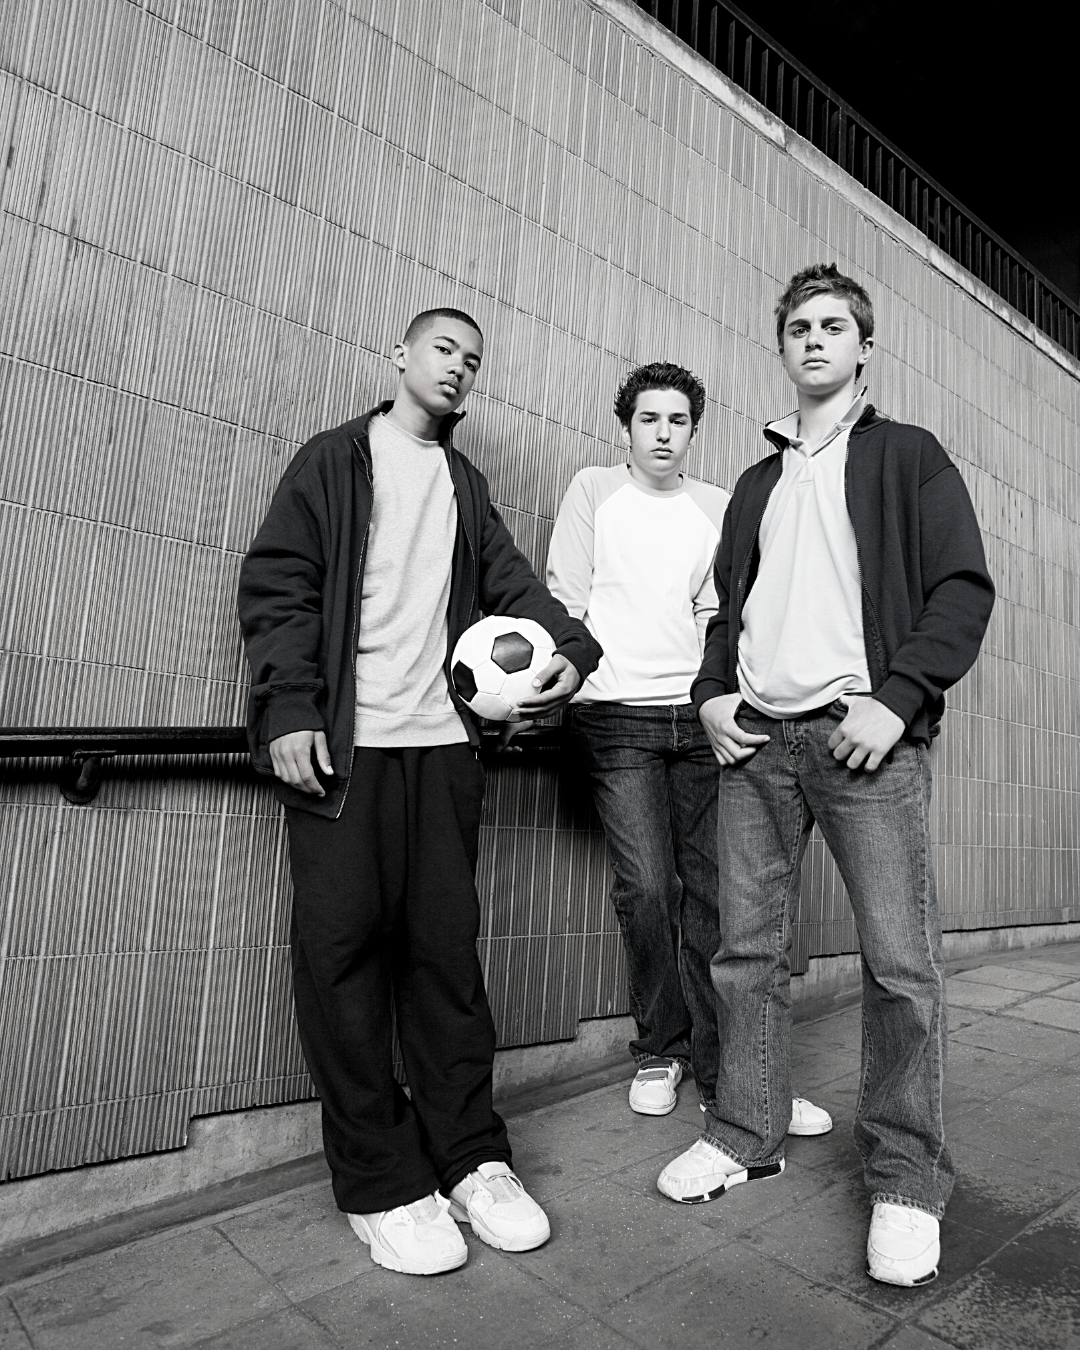 Three teen boys leaning against a wall, one is holding a soccer ball.